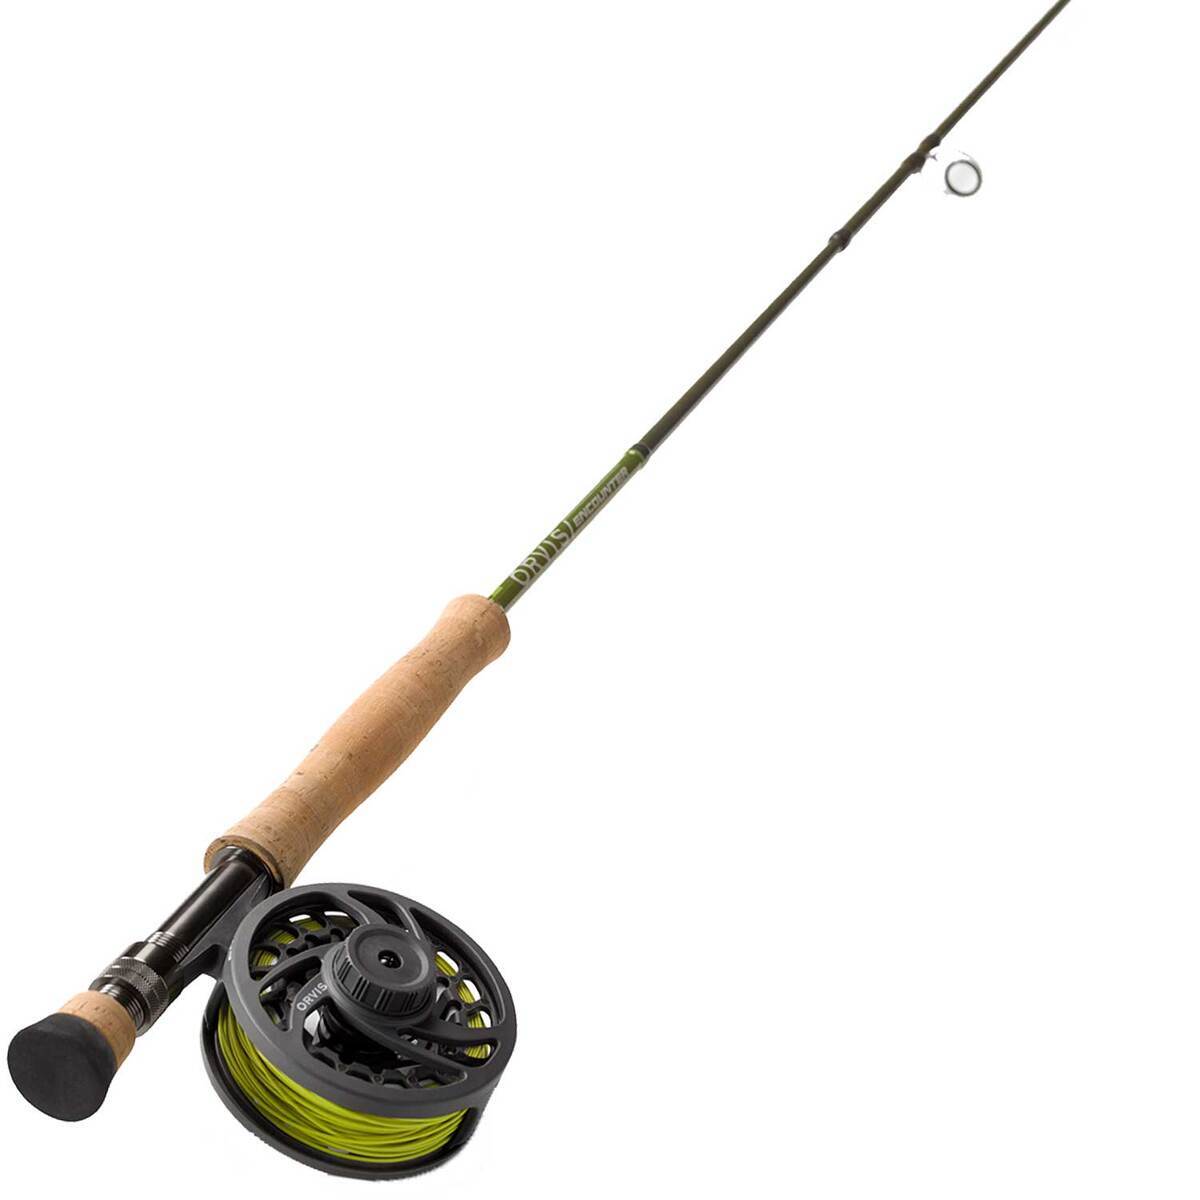  Fly Fishing Rods - Douglas / Fly Fishing Rods / Fly Fishing  Equipment: Sports & Outdoors